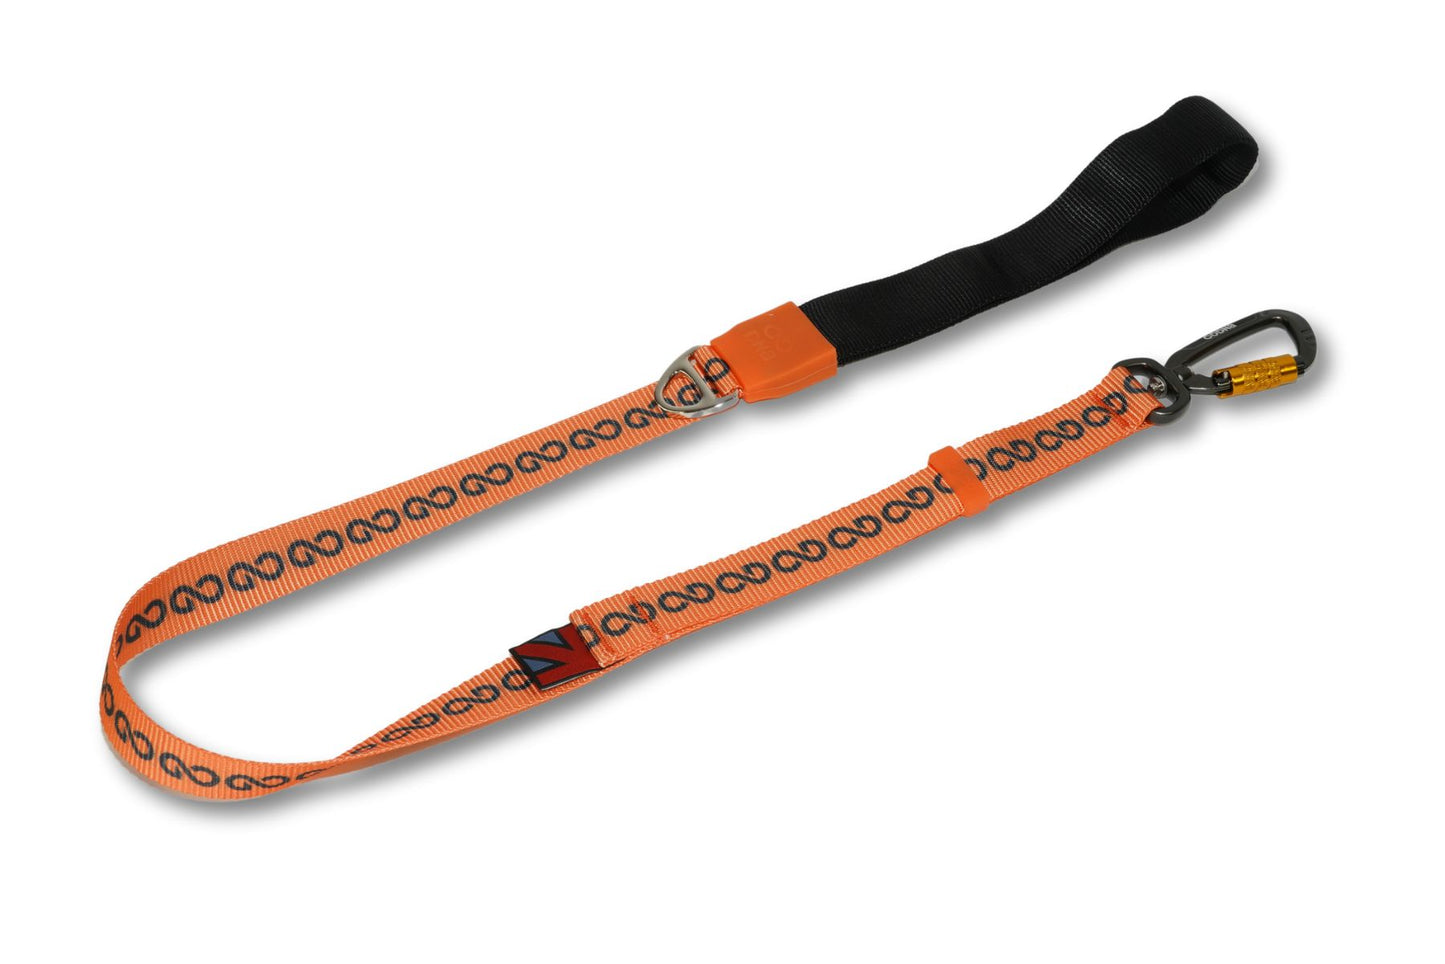 DNA - Summit - Pro Lead - Traffic Handle & Secure Carabiner - 4 Colour Options